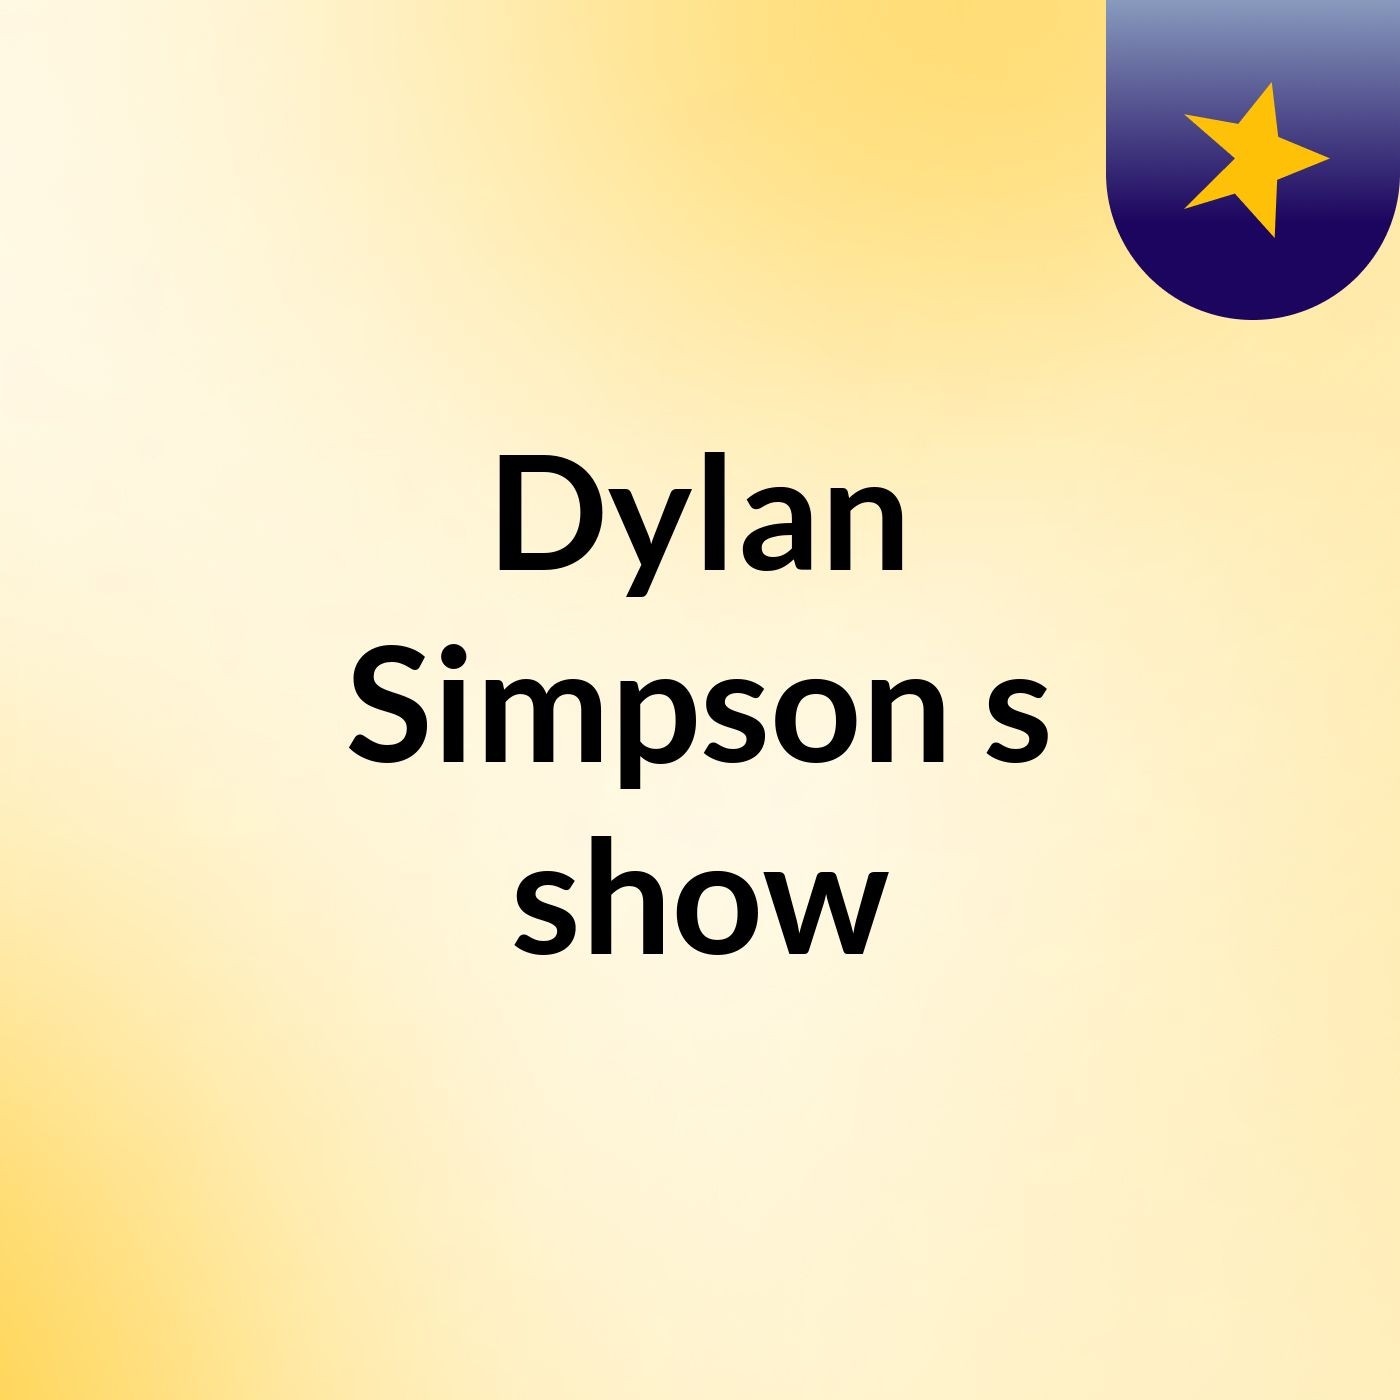 Dylan Simpson's show